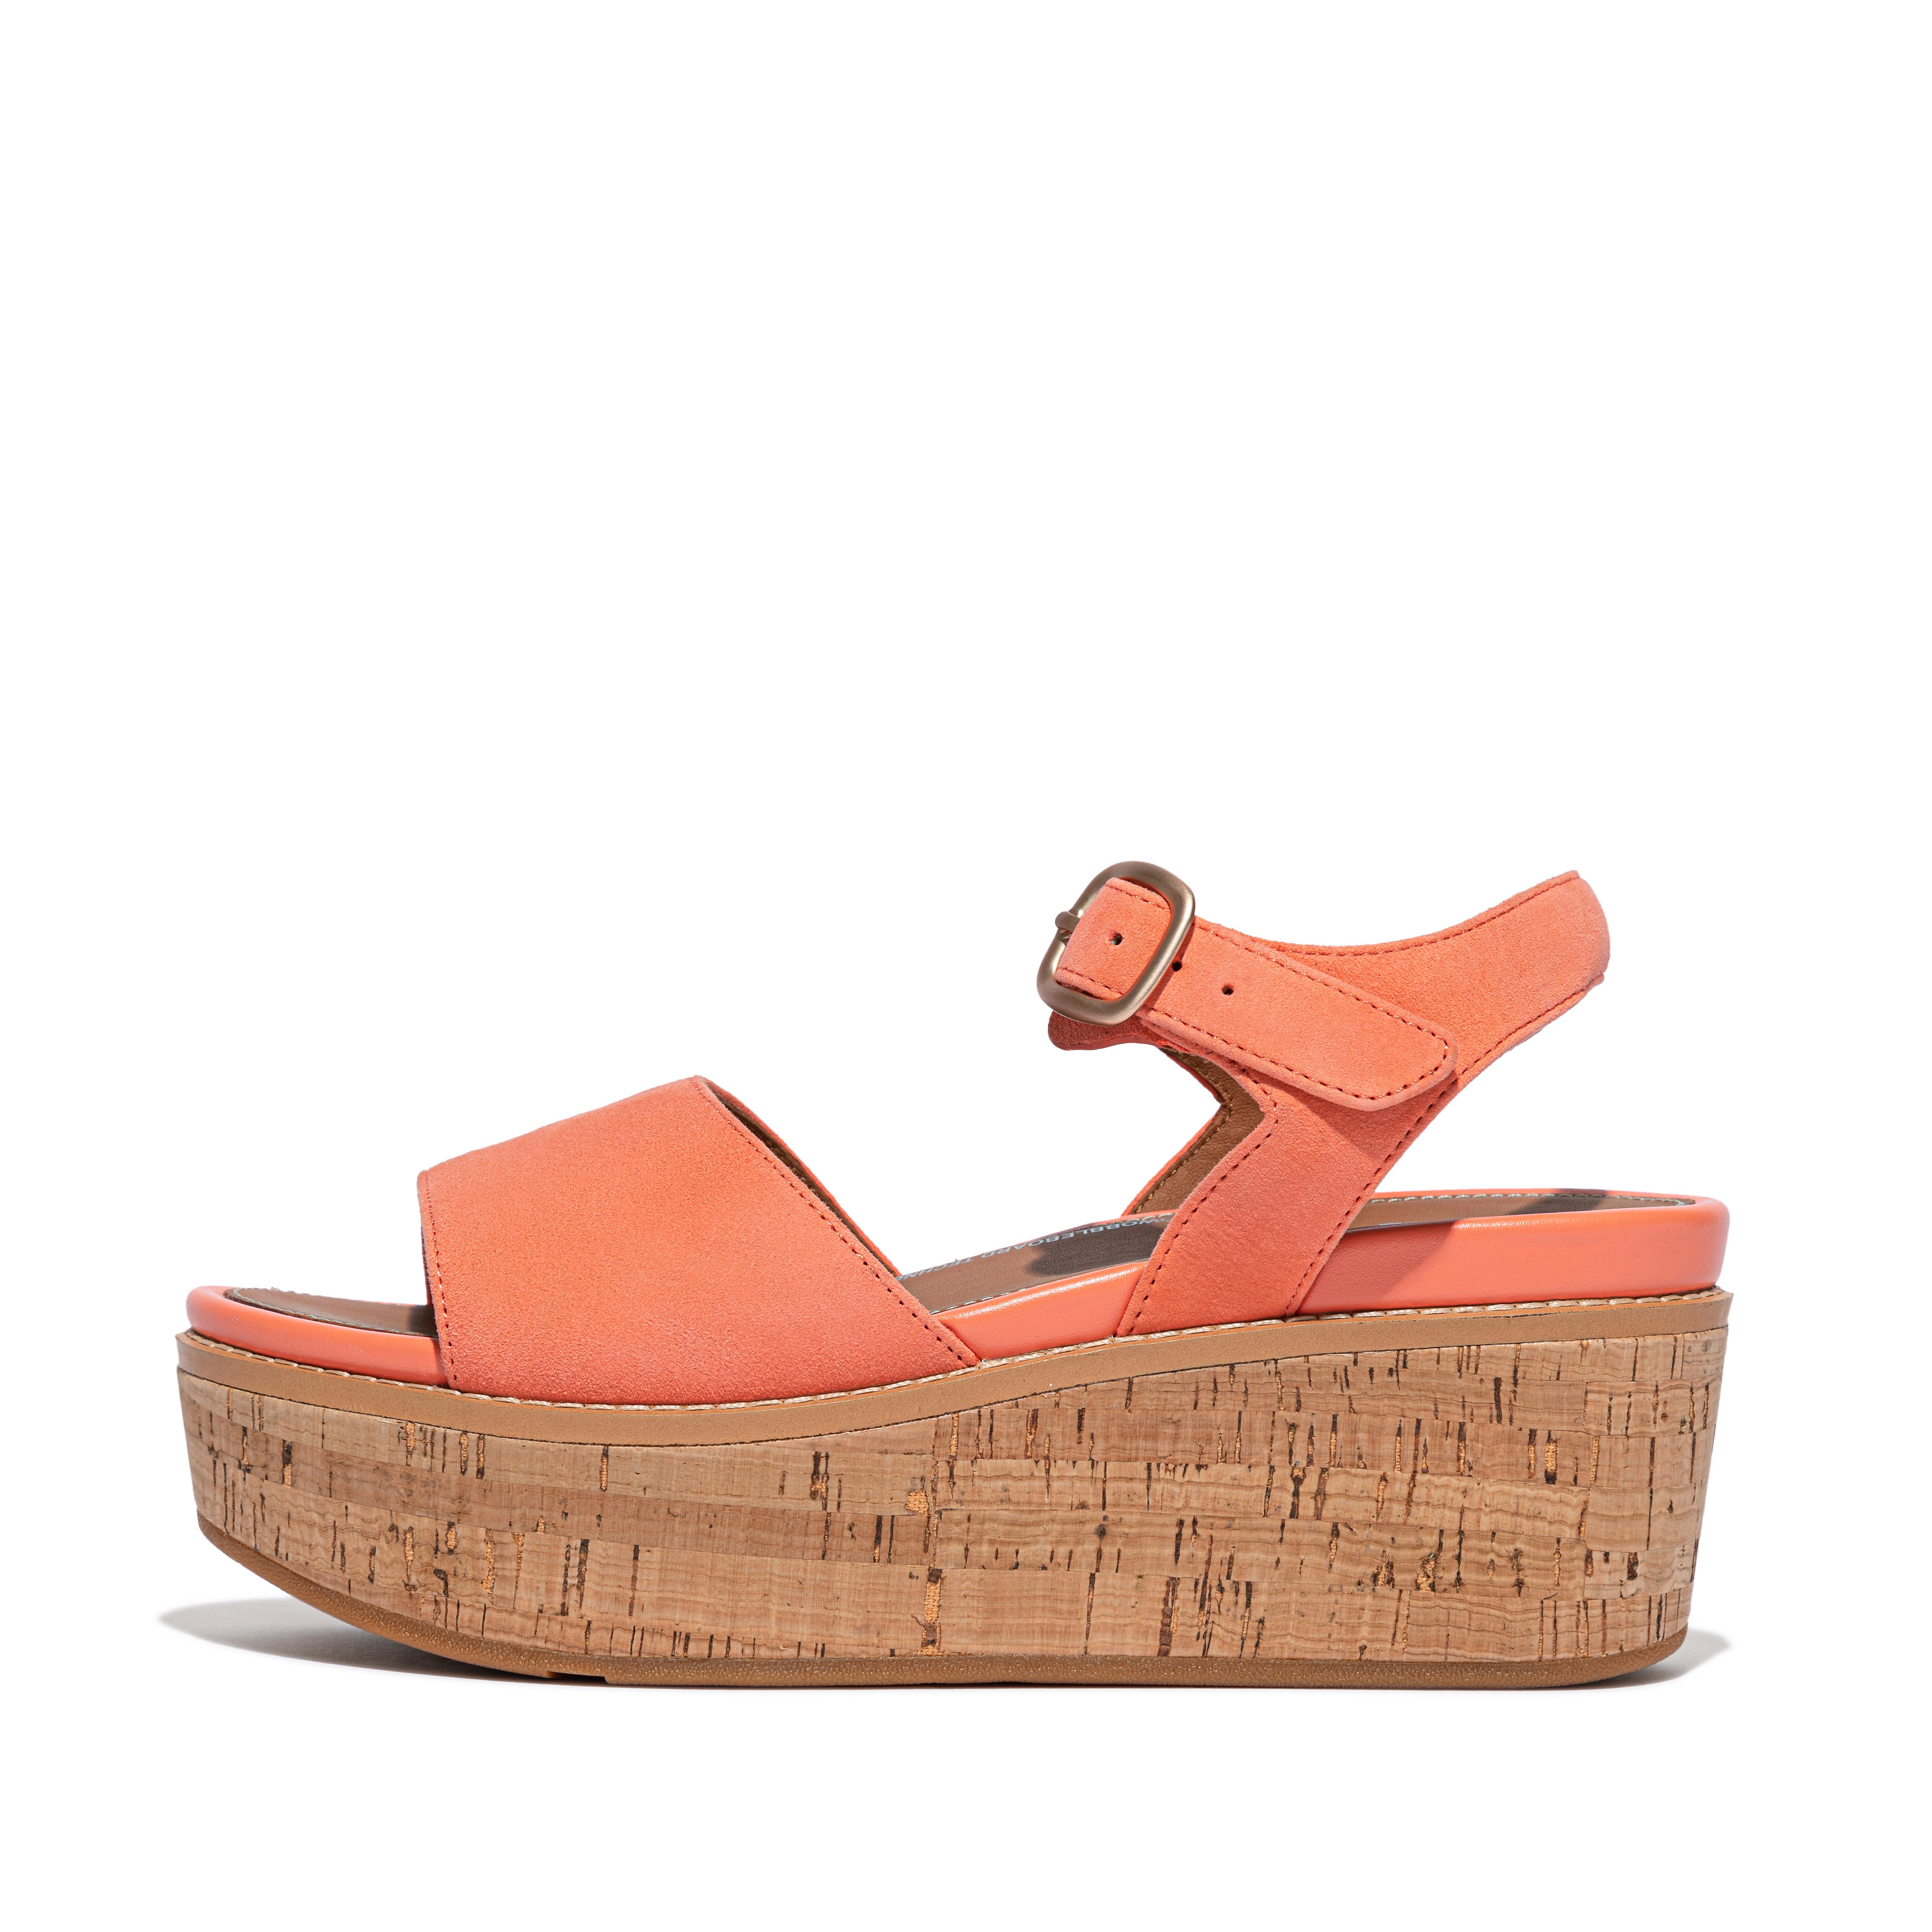 Fitflop Cork-Wrap Suede Wedge Sandals